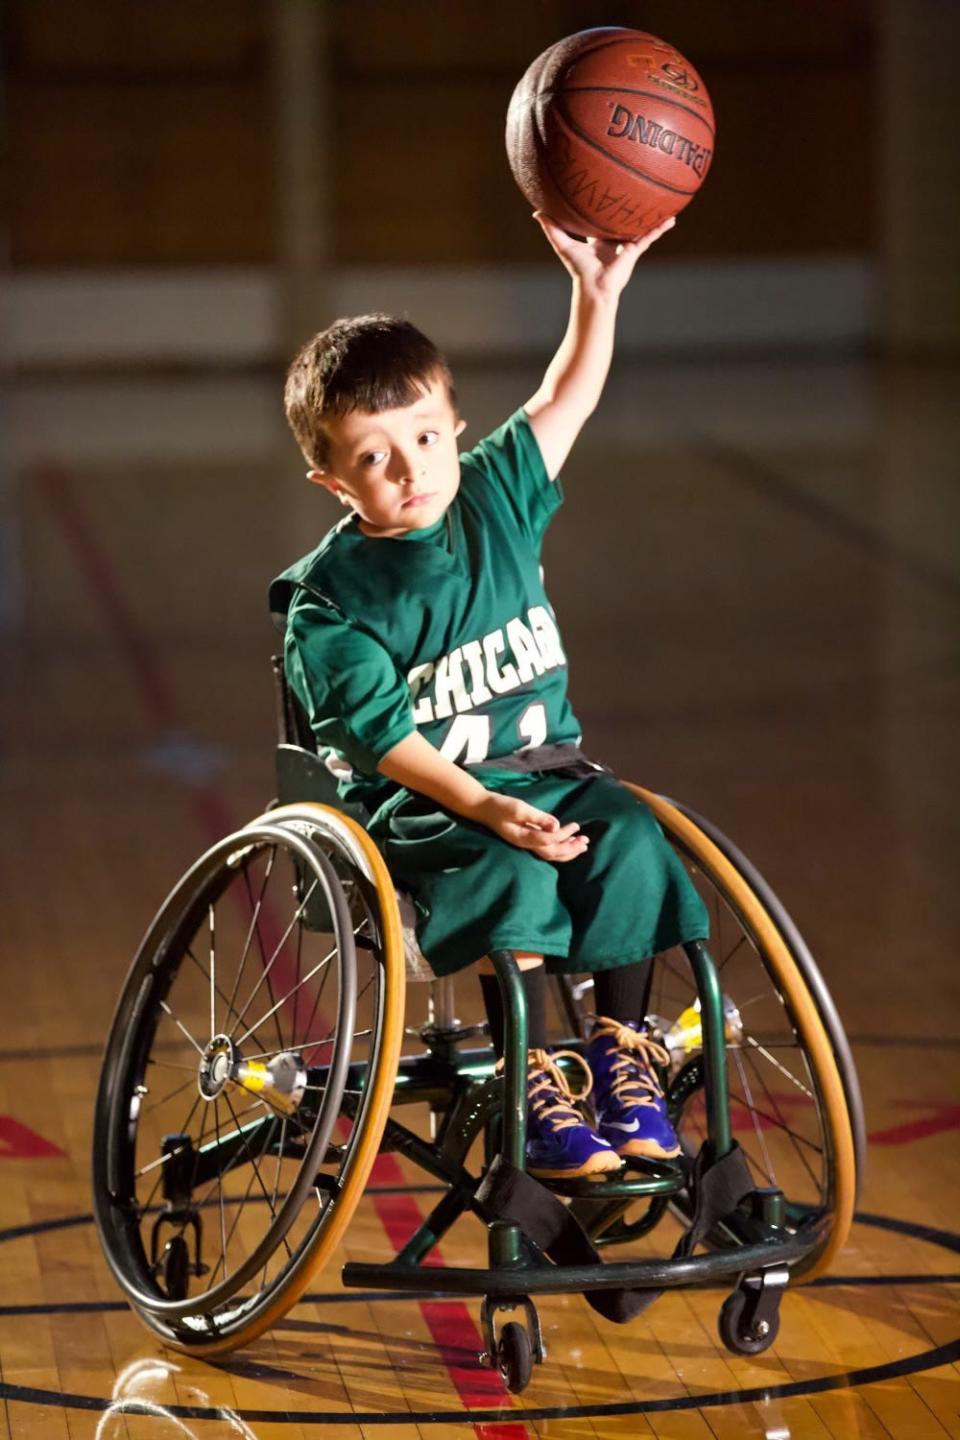 Alec Cabacungan, a national television spokesperson for Shriners Hospitals for Children, is shown as a young boy playing basketball in Chicago. Cabacungan was an Indiana Pacers intern this summer.